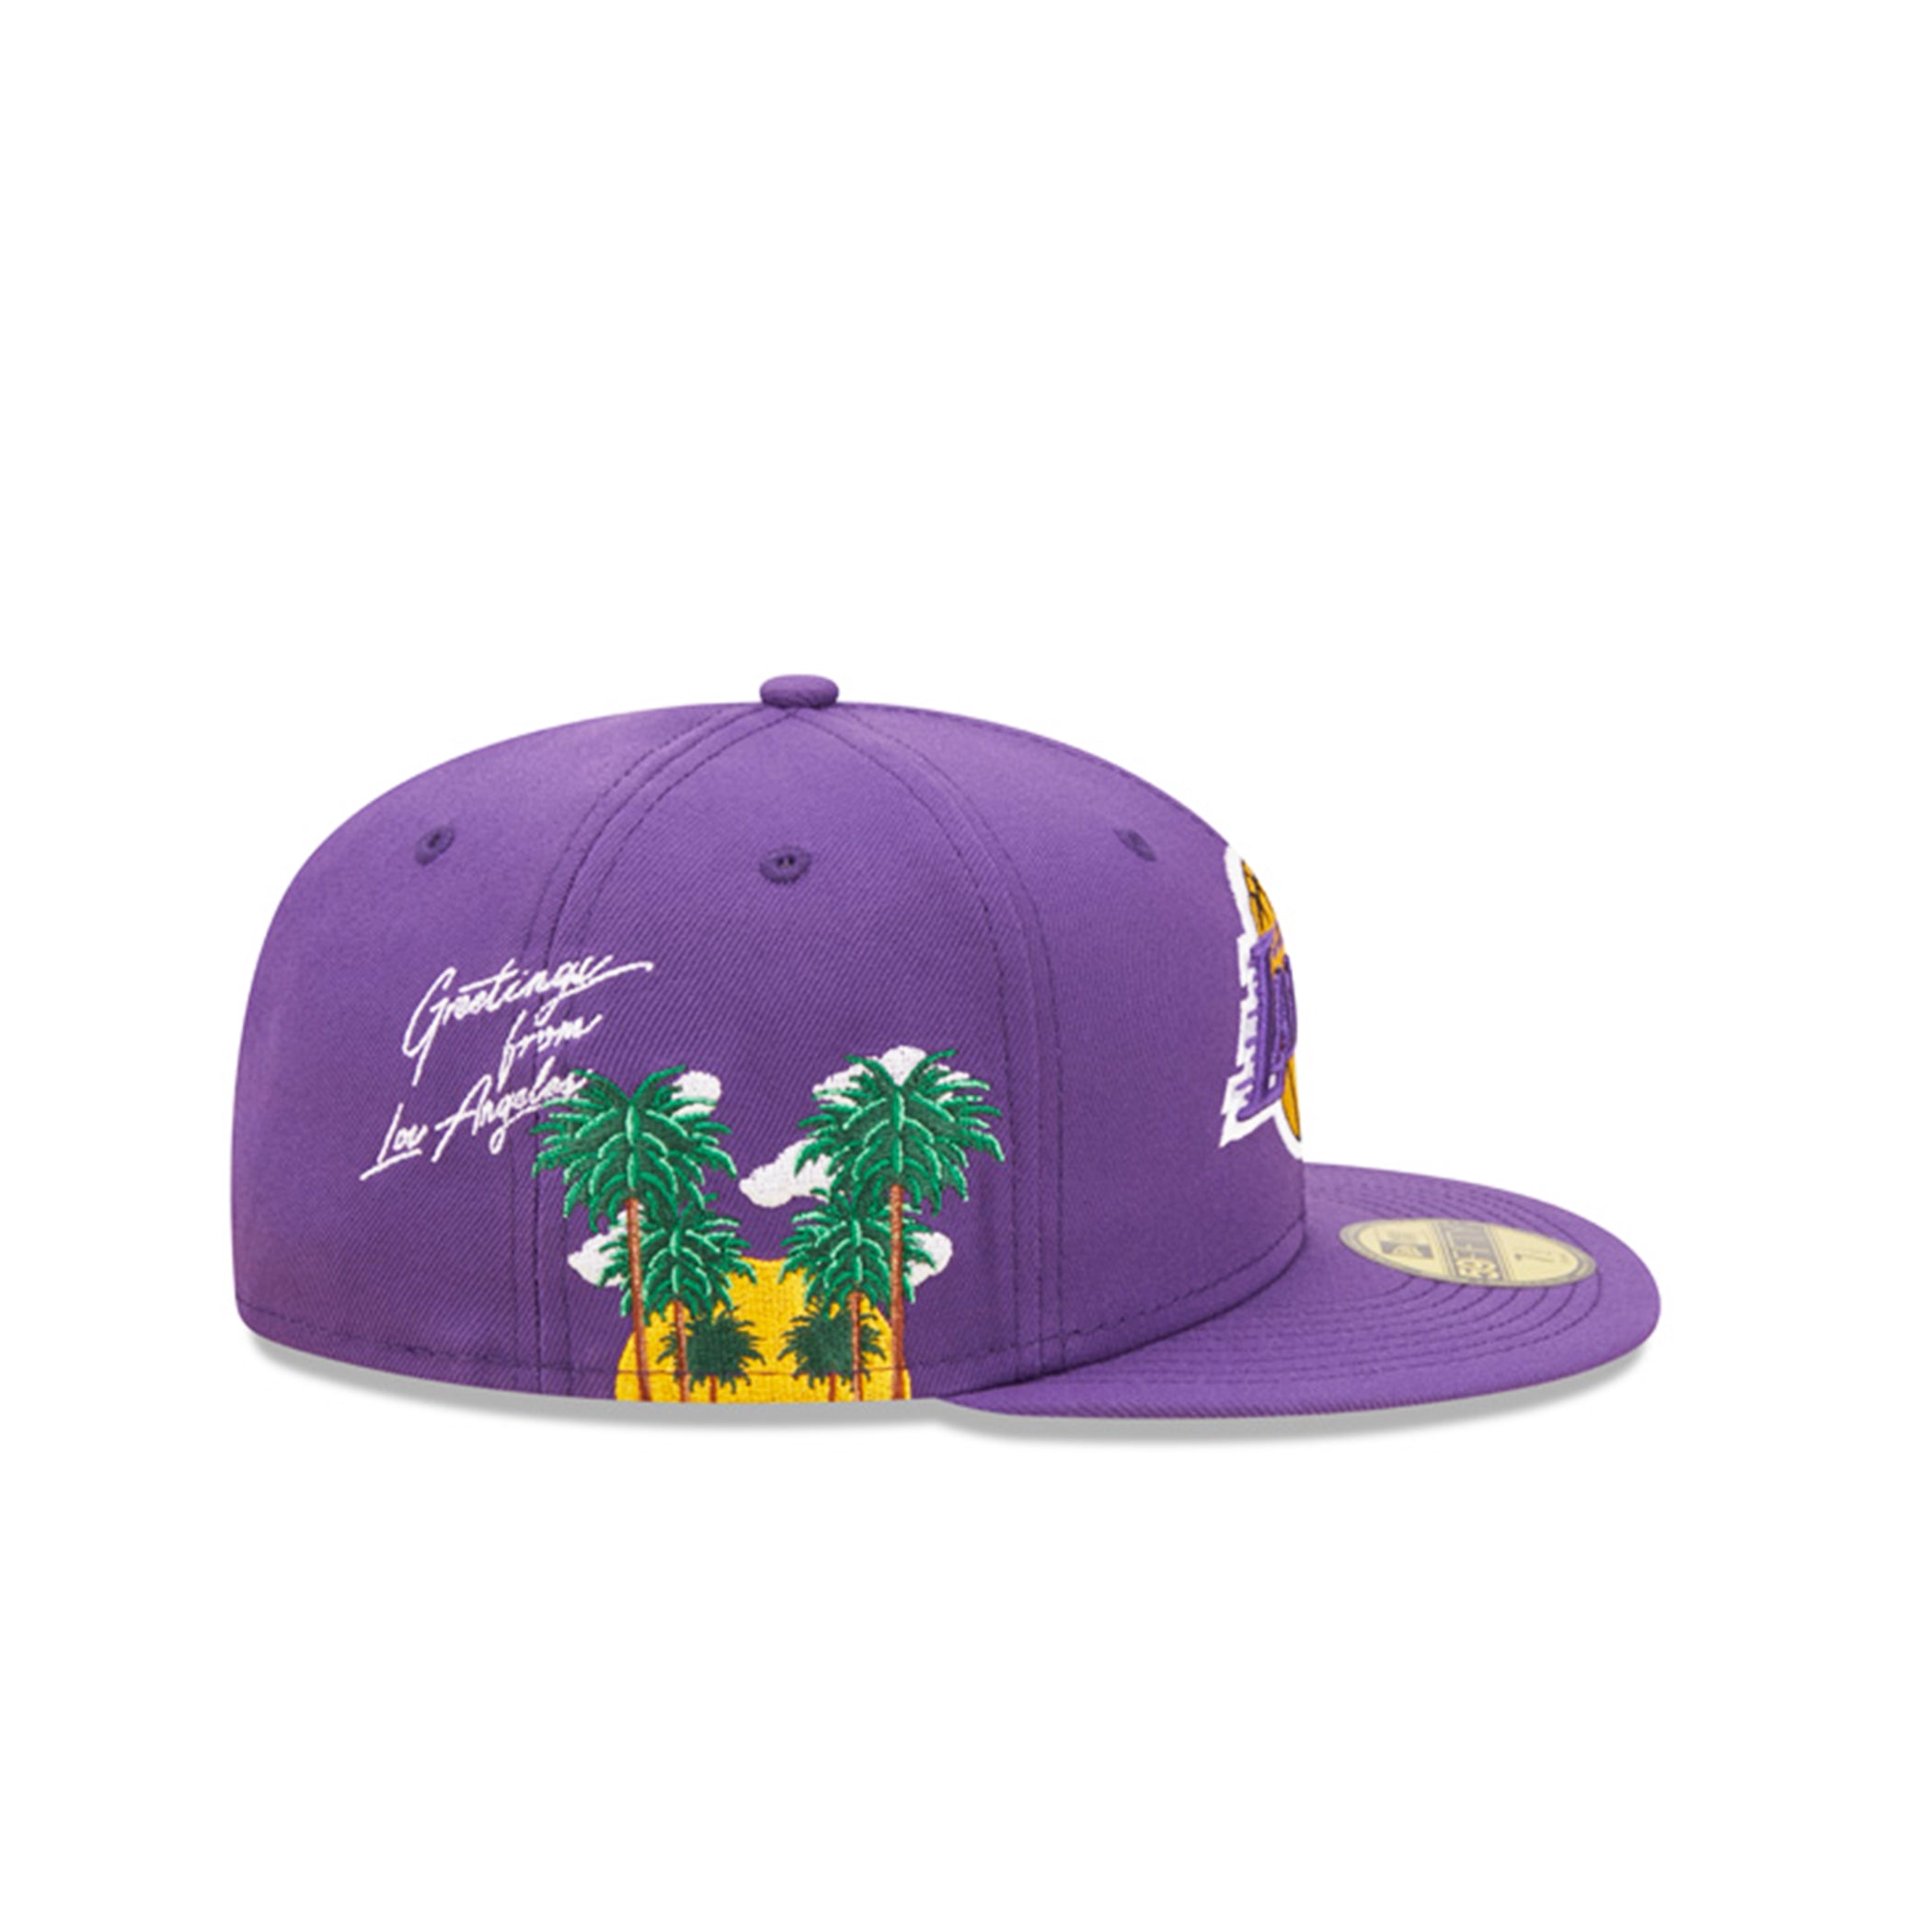 New Era Men's Los Angeles Lakers 59FIFTY Fitted Hat - Purple & Gold - 7 1/2